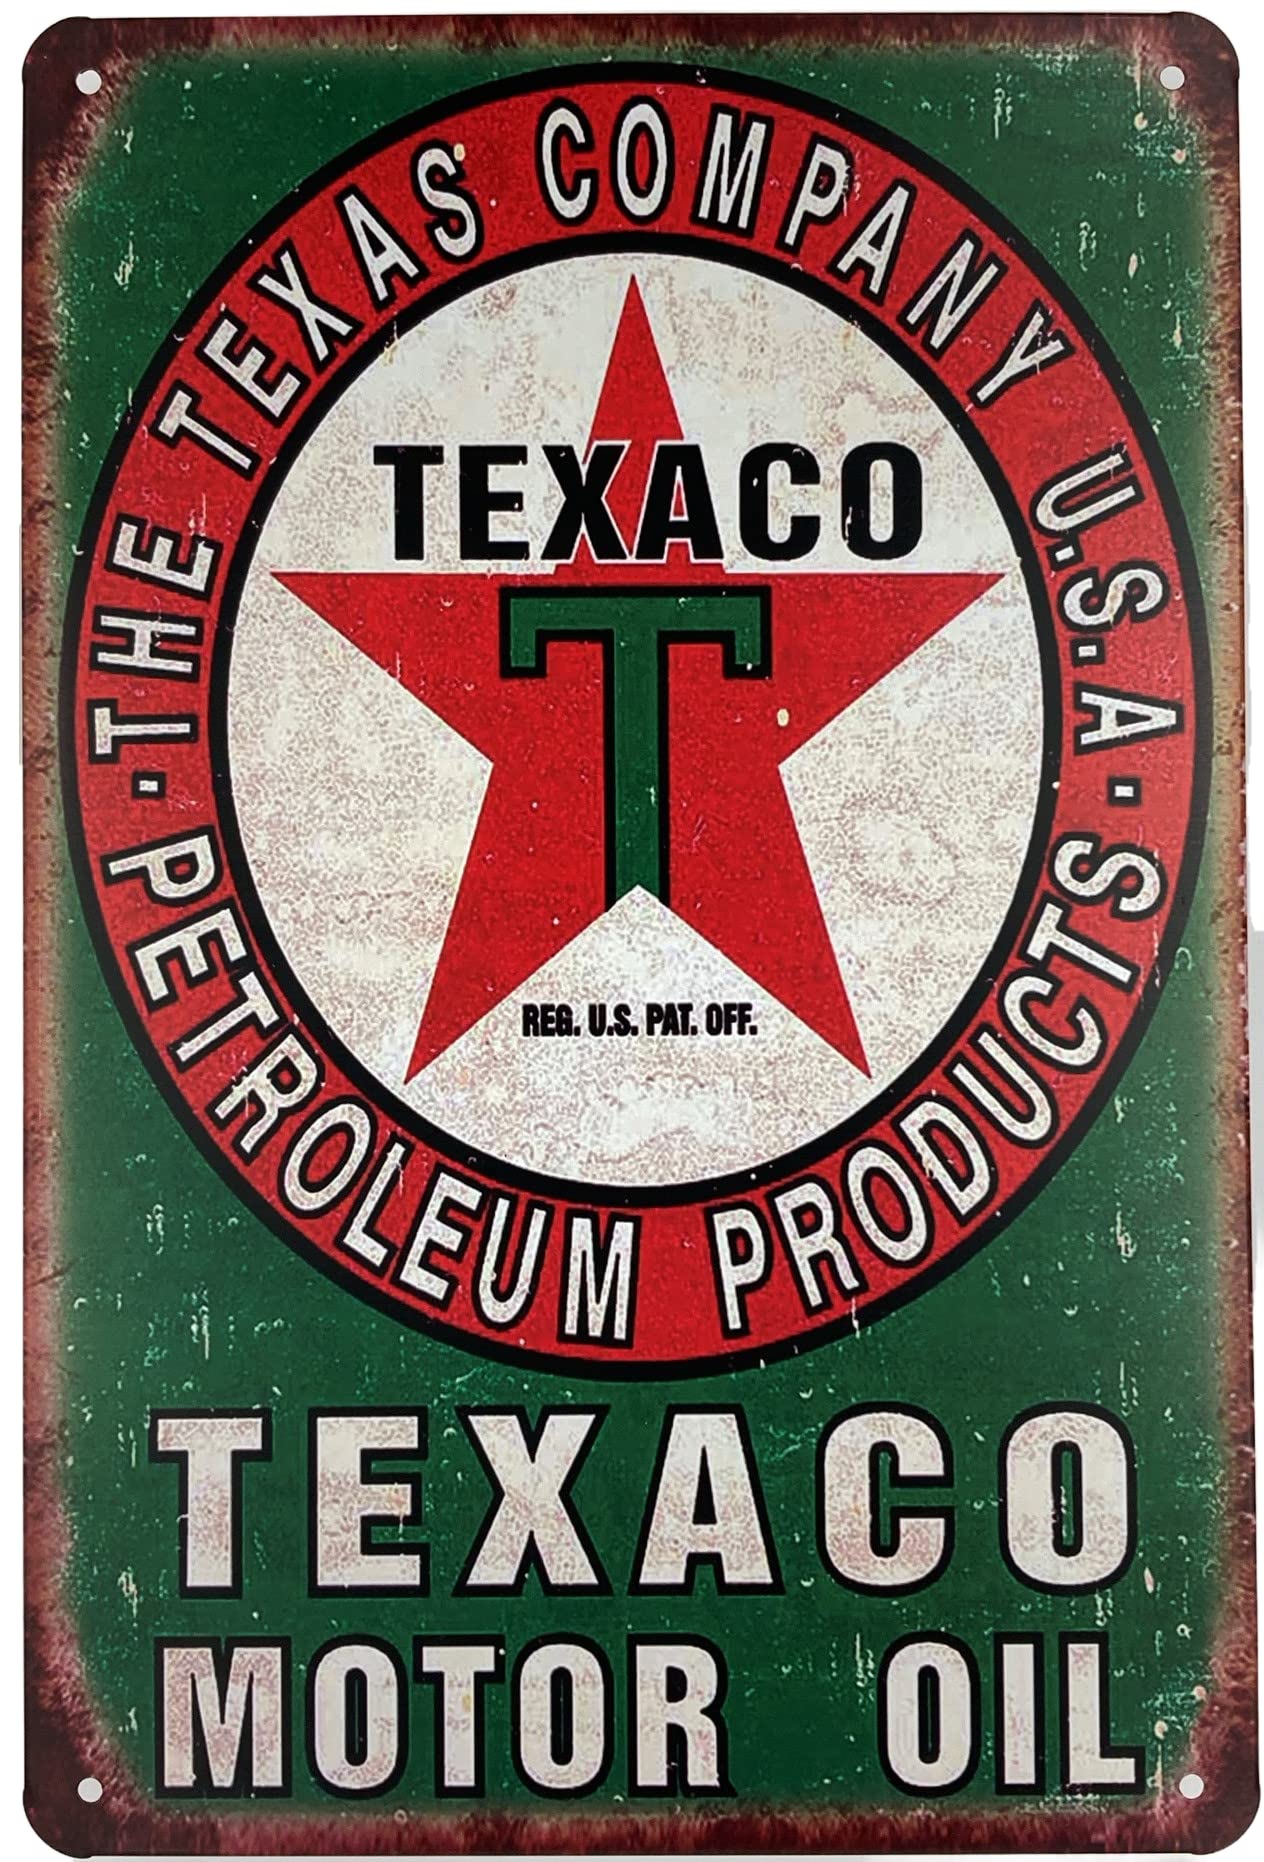 Tin Sign Metal Wall Decor | Gas Station Motor Oil Company | 8 x 12 in | Decorative Plaque Poster For Home Bar Room Garage Decor | Vintage Retro Man Cave Style